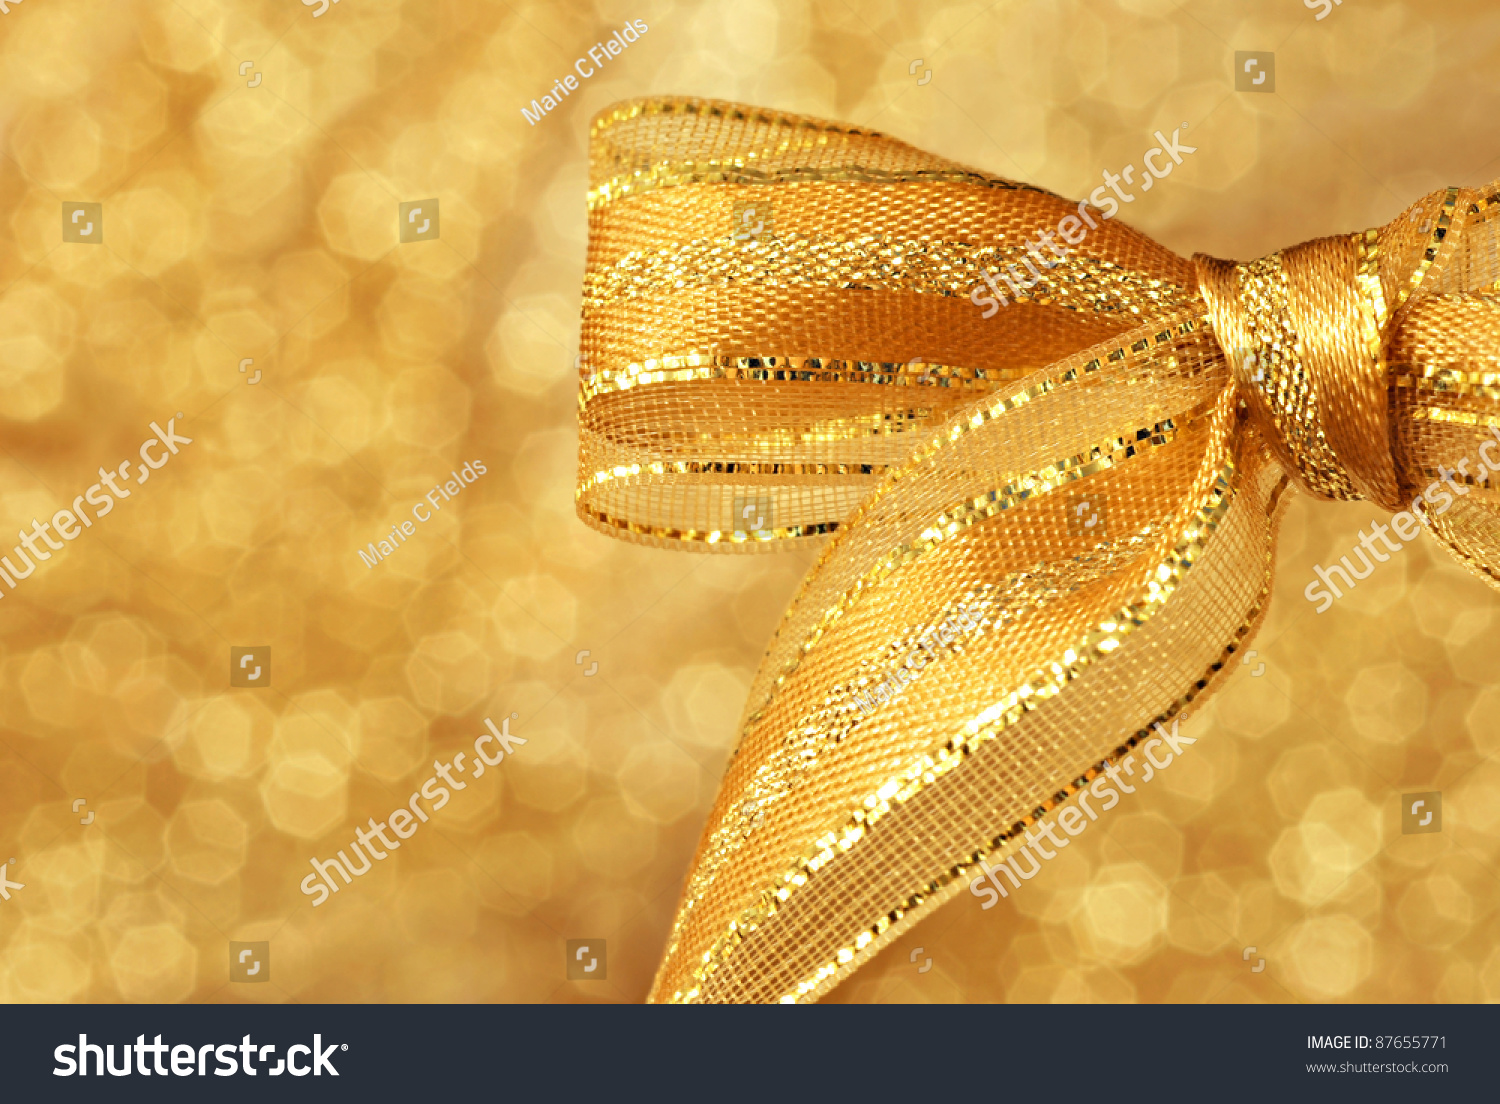 Shiny Gold Metallic Bow Against Background Of Shimmery Gold Fabric ...